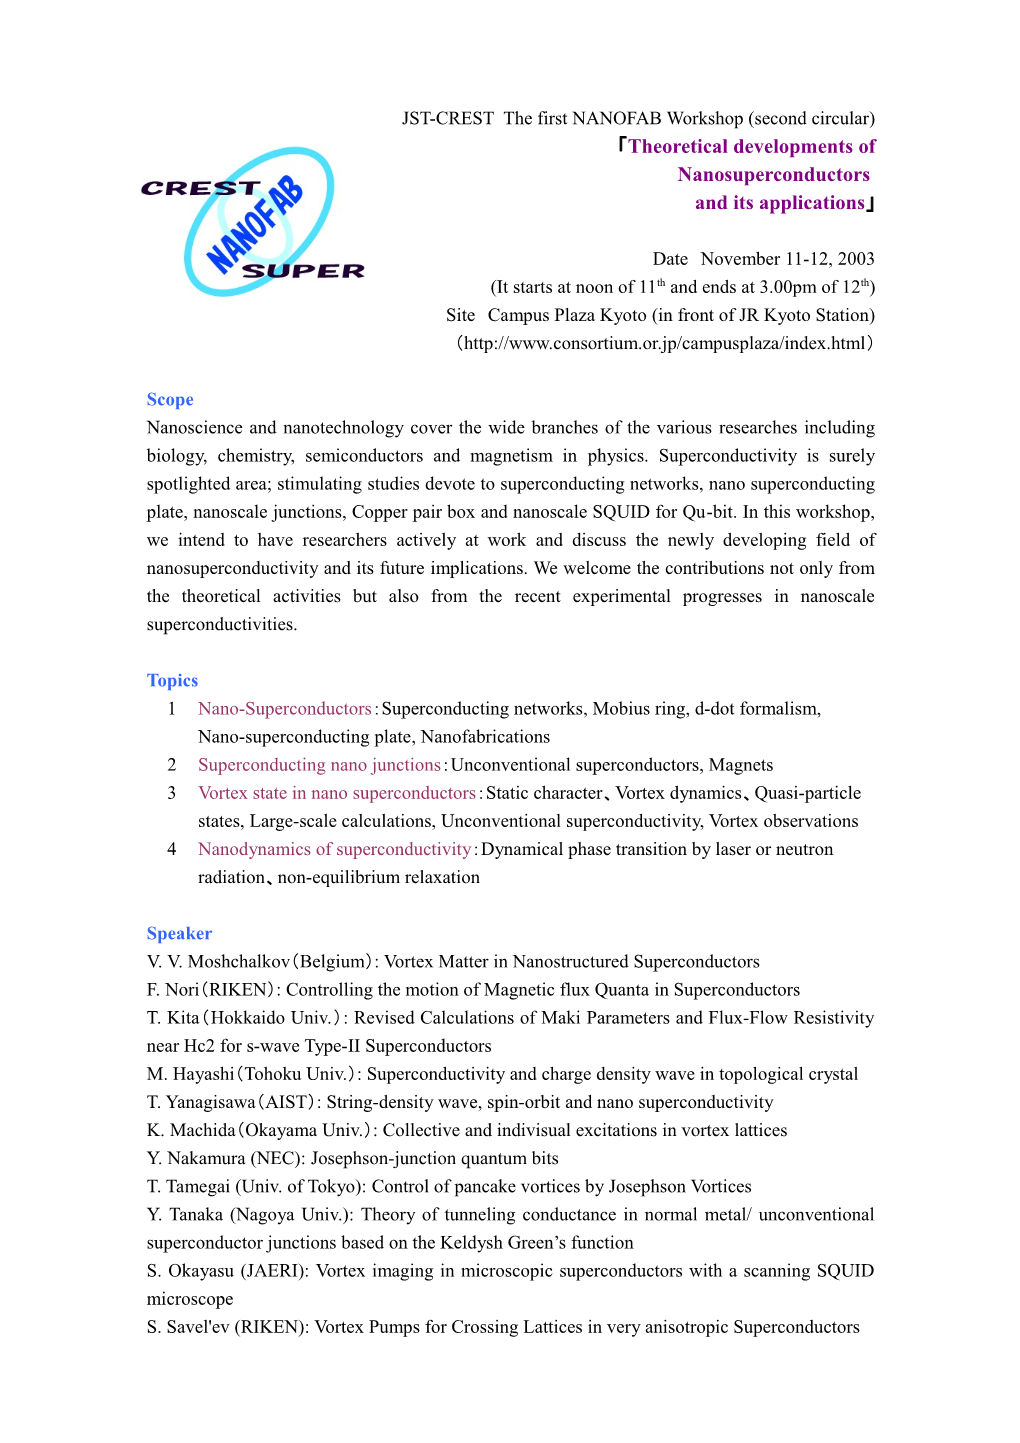 JST-CREST the Firstnanofab Workshop (Second Circular) Theoretical Developments Of